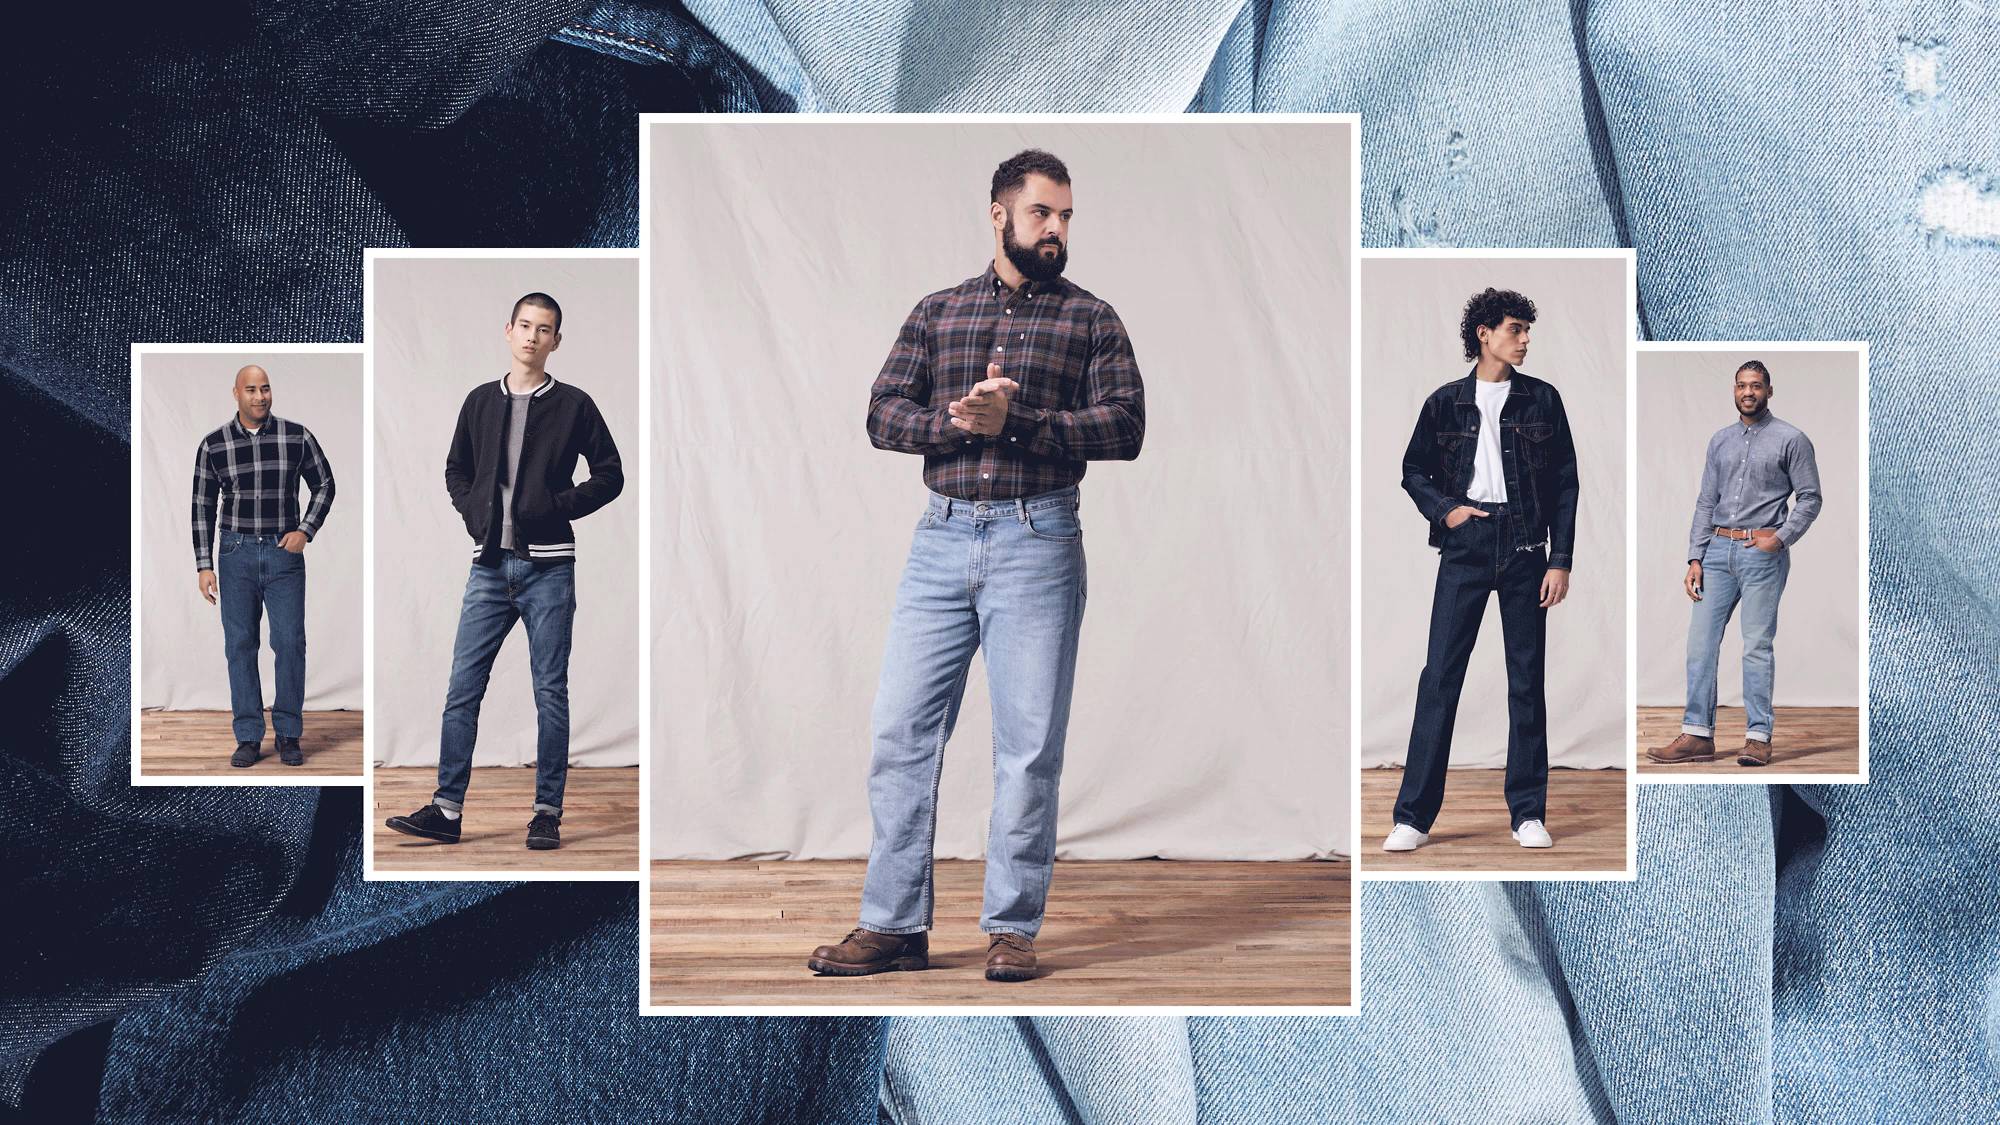 Video of five models featured in various denim jeans - ranging from lighter wash to darker washes.